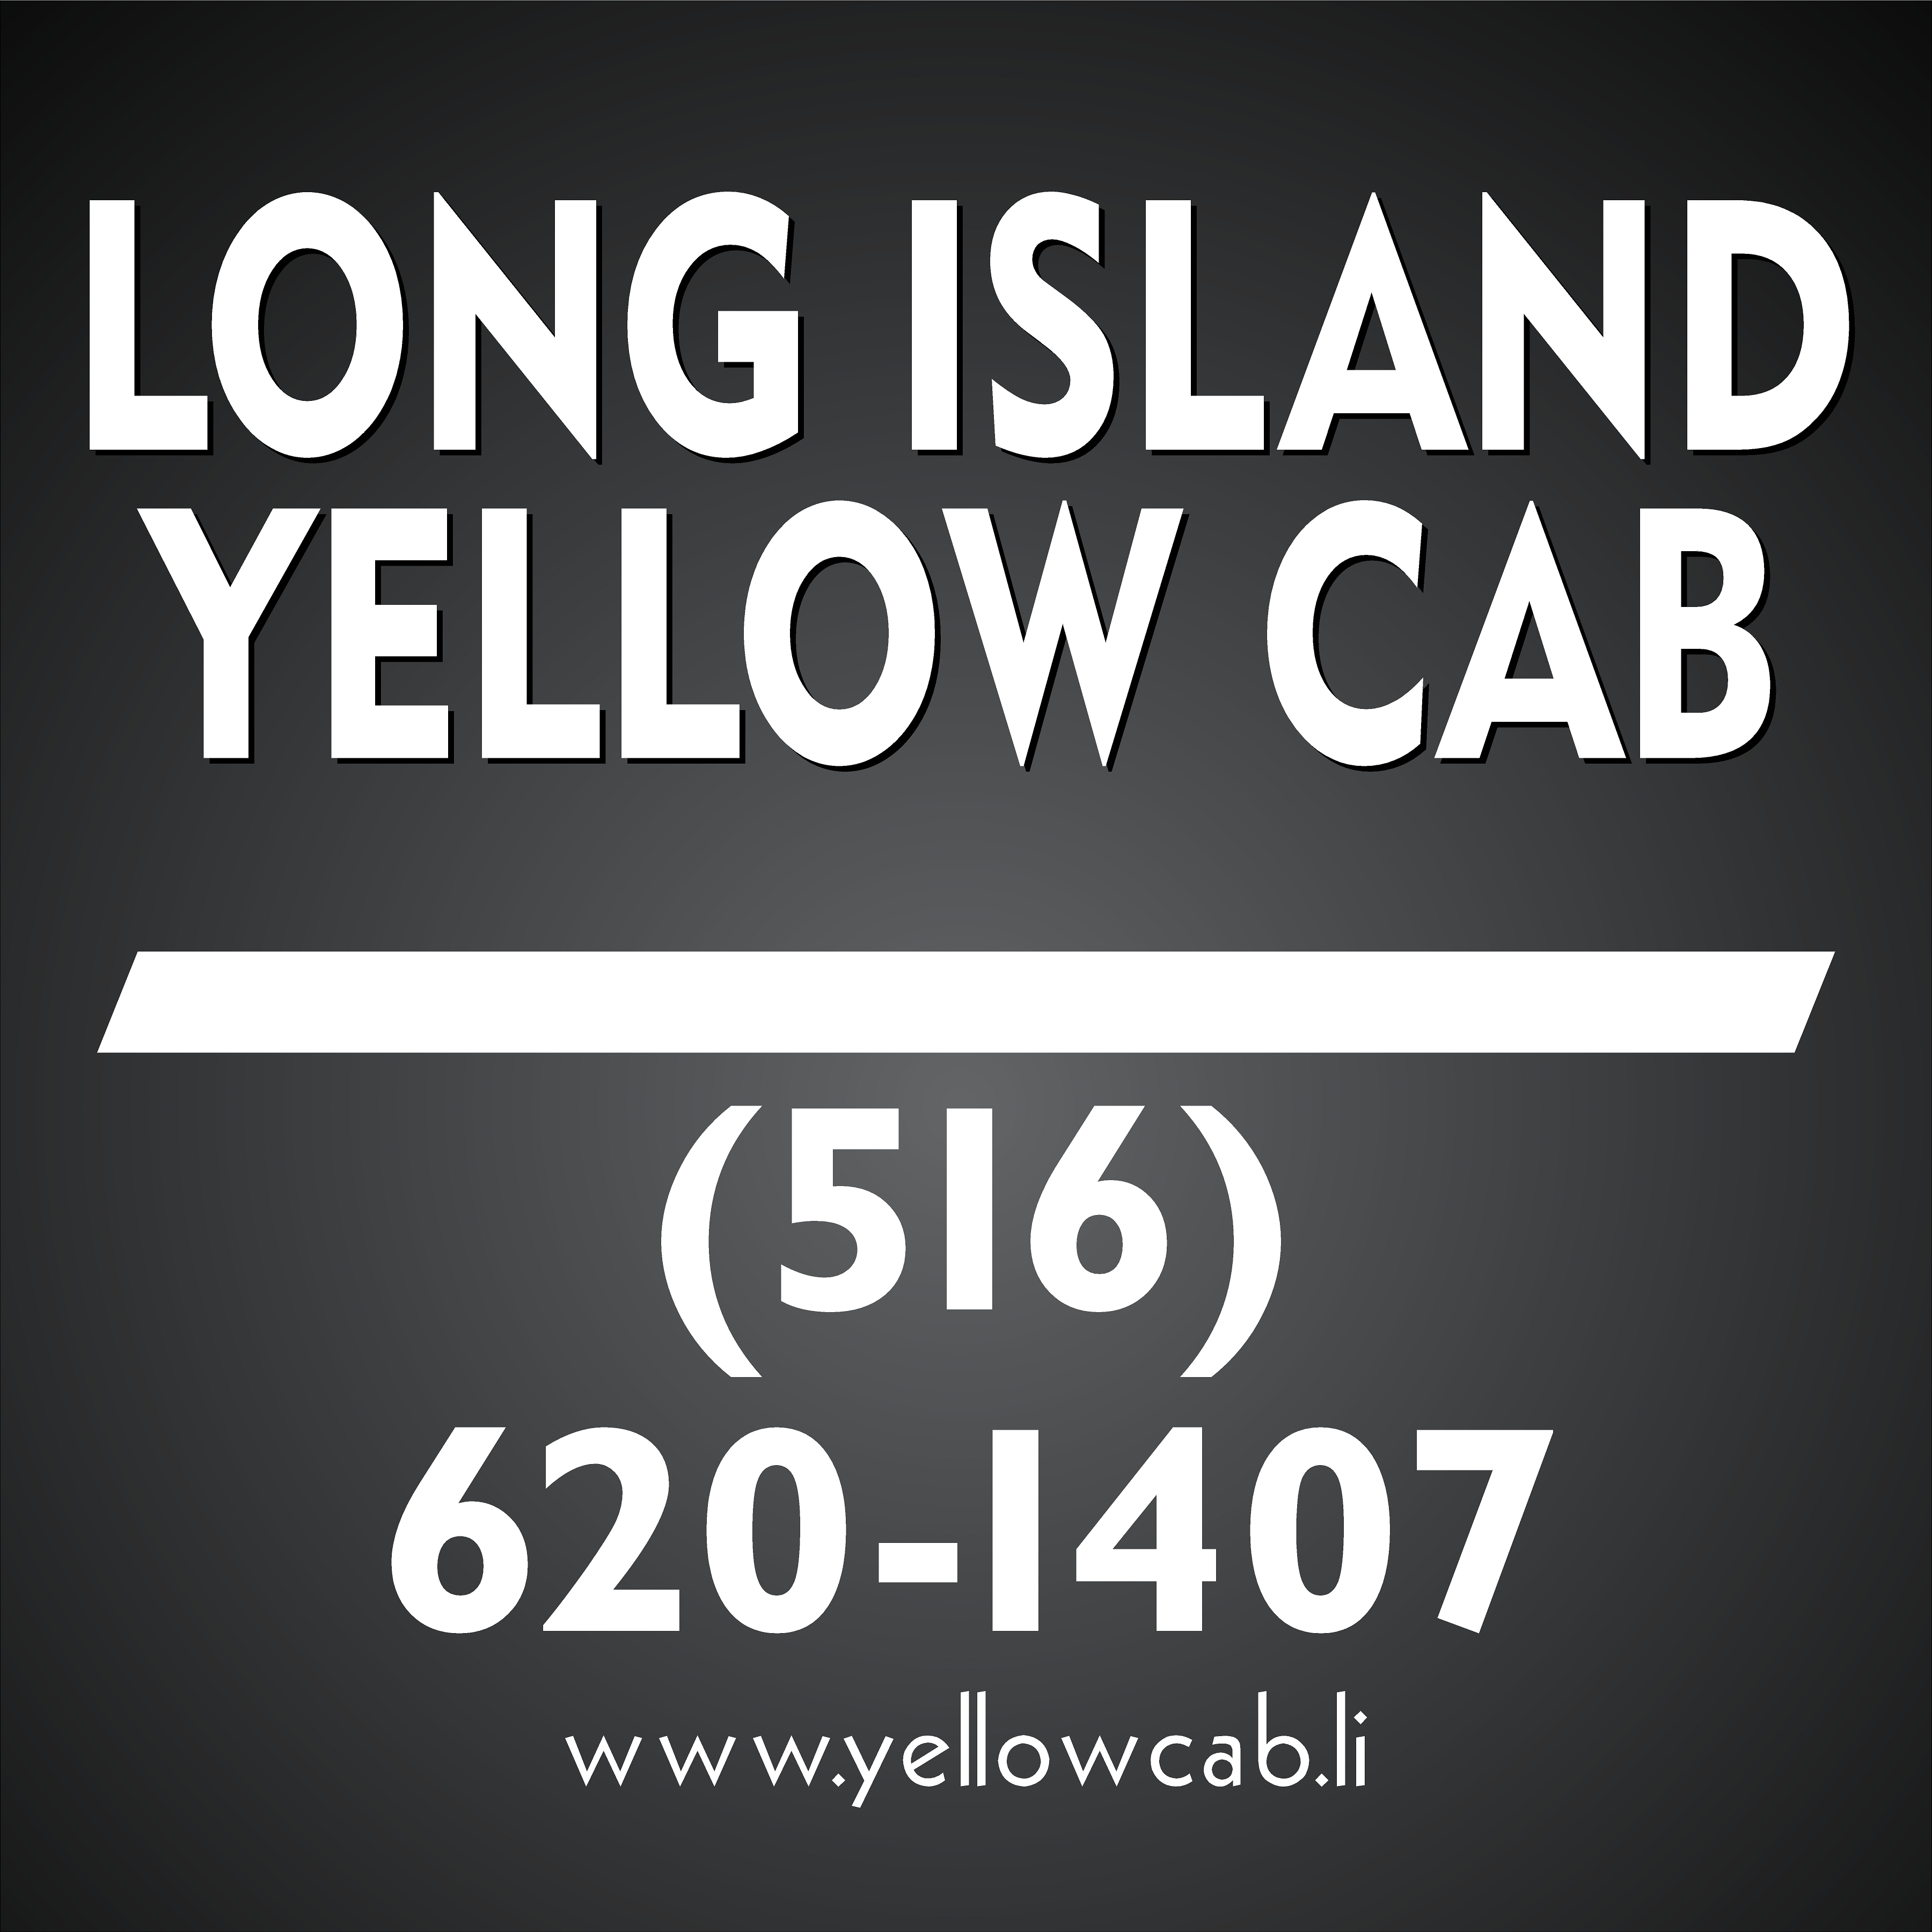 Long Island Yellow Cab Remains a Popular Option for Transportation Among Long Island Commuters 